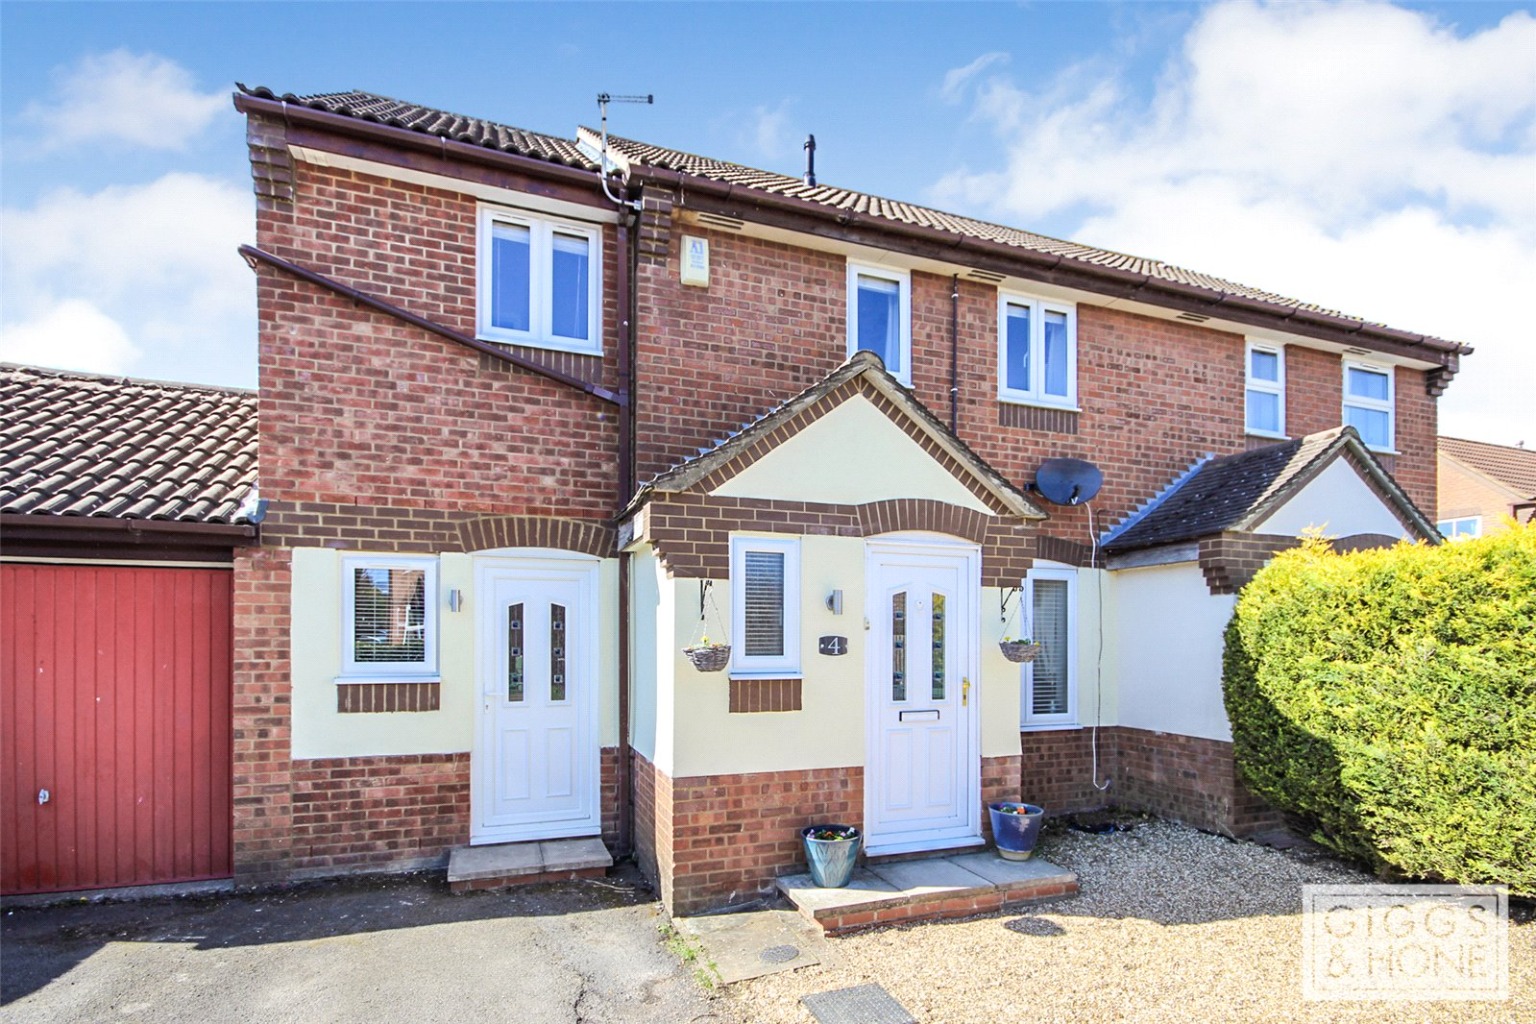 Offered for sale in immaculate condition throughout, this extended semi-detached property offers an abundance of living space, making this an ideal home for your growing family.